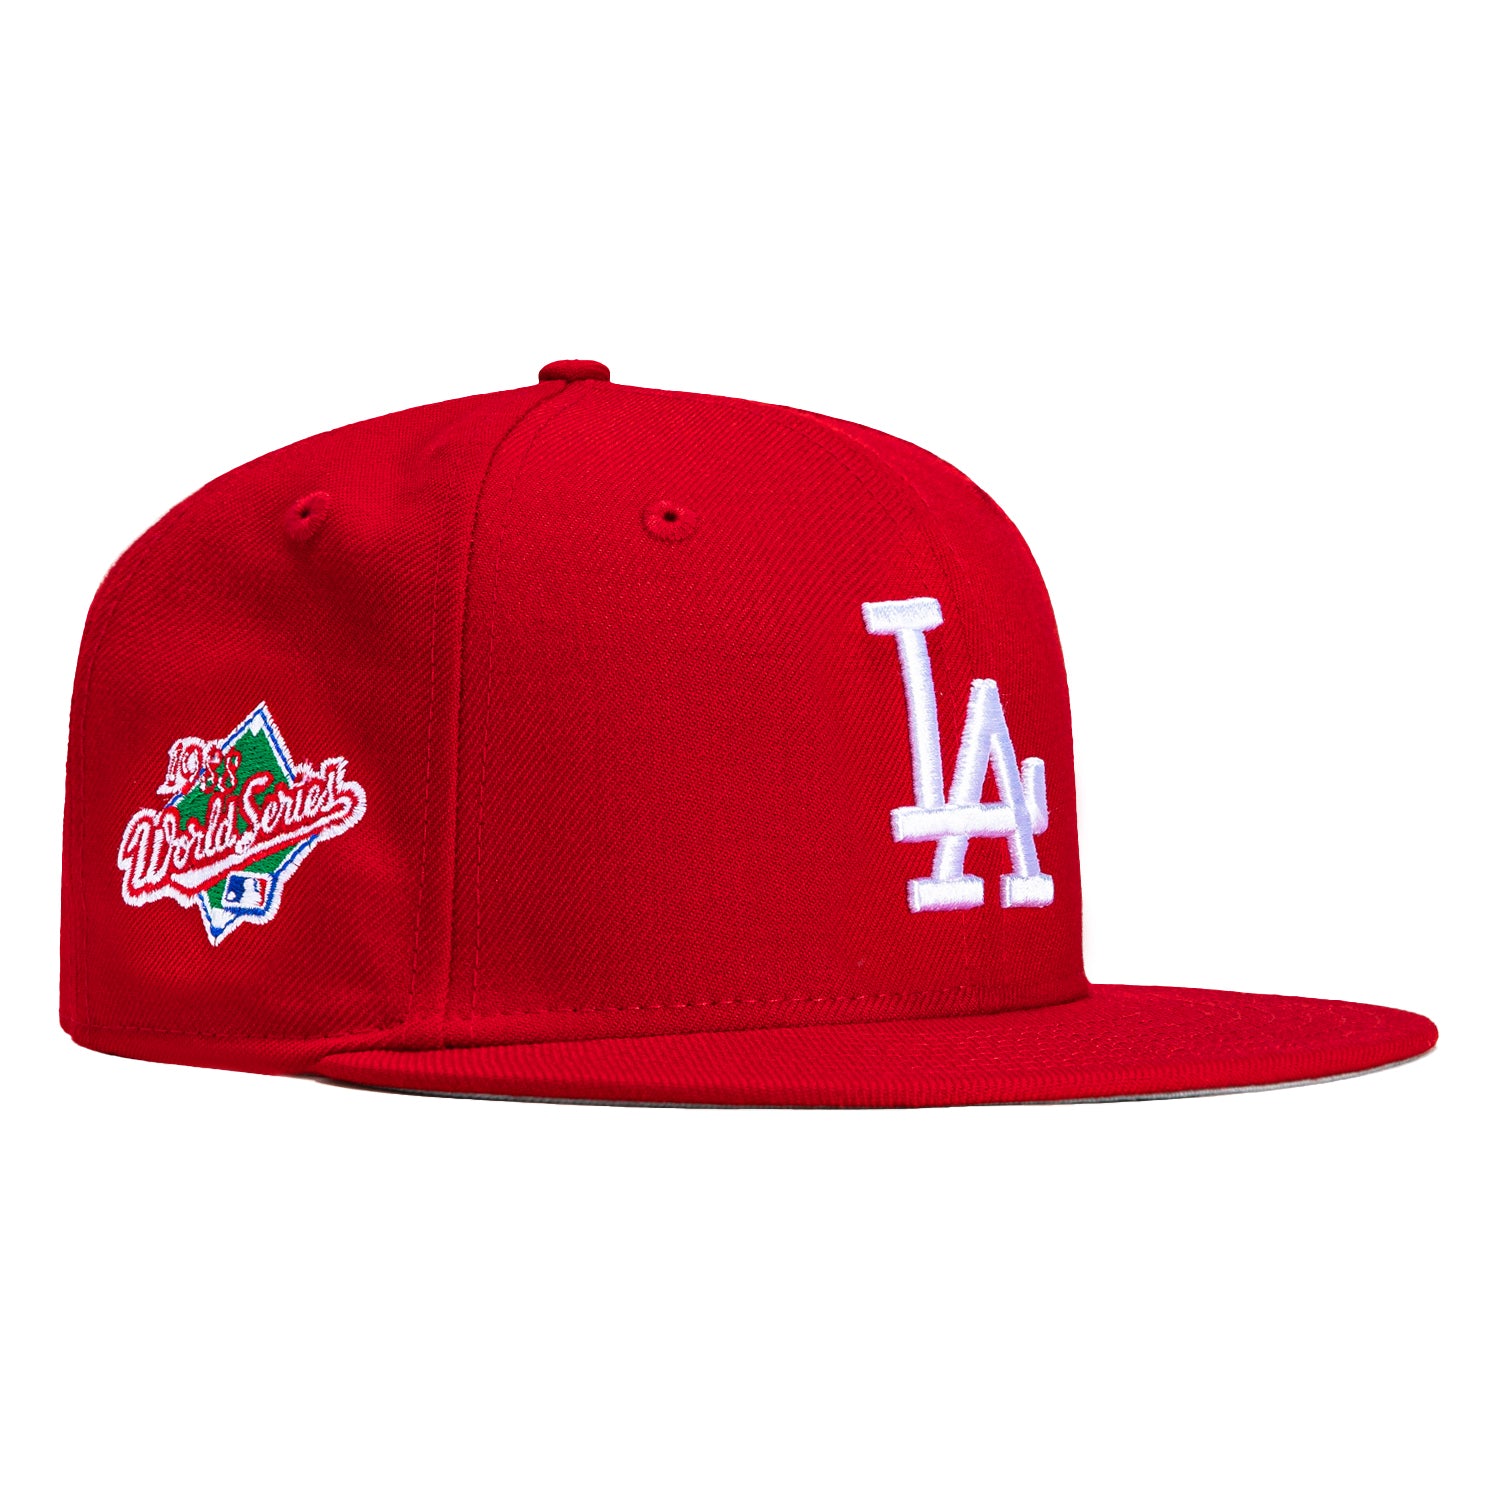 New Era 59FIFTY Los Angeles Dodgers 1988 World Series Patch Pink UV Hat - Royal Royal / 8